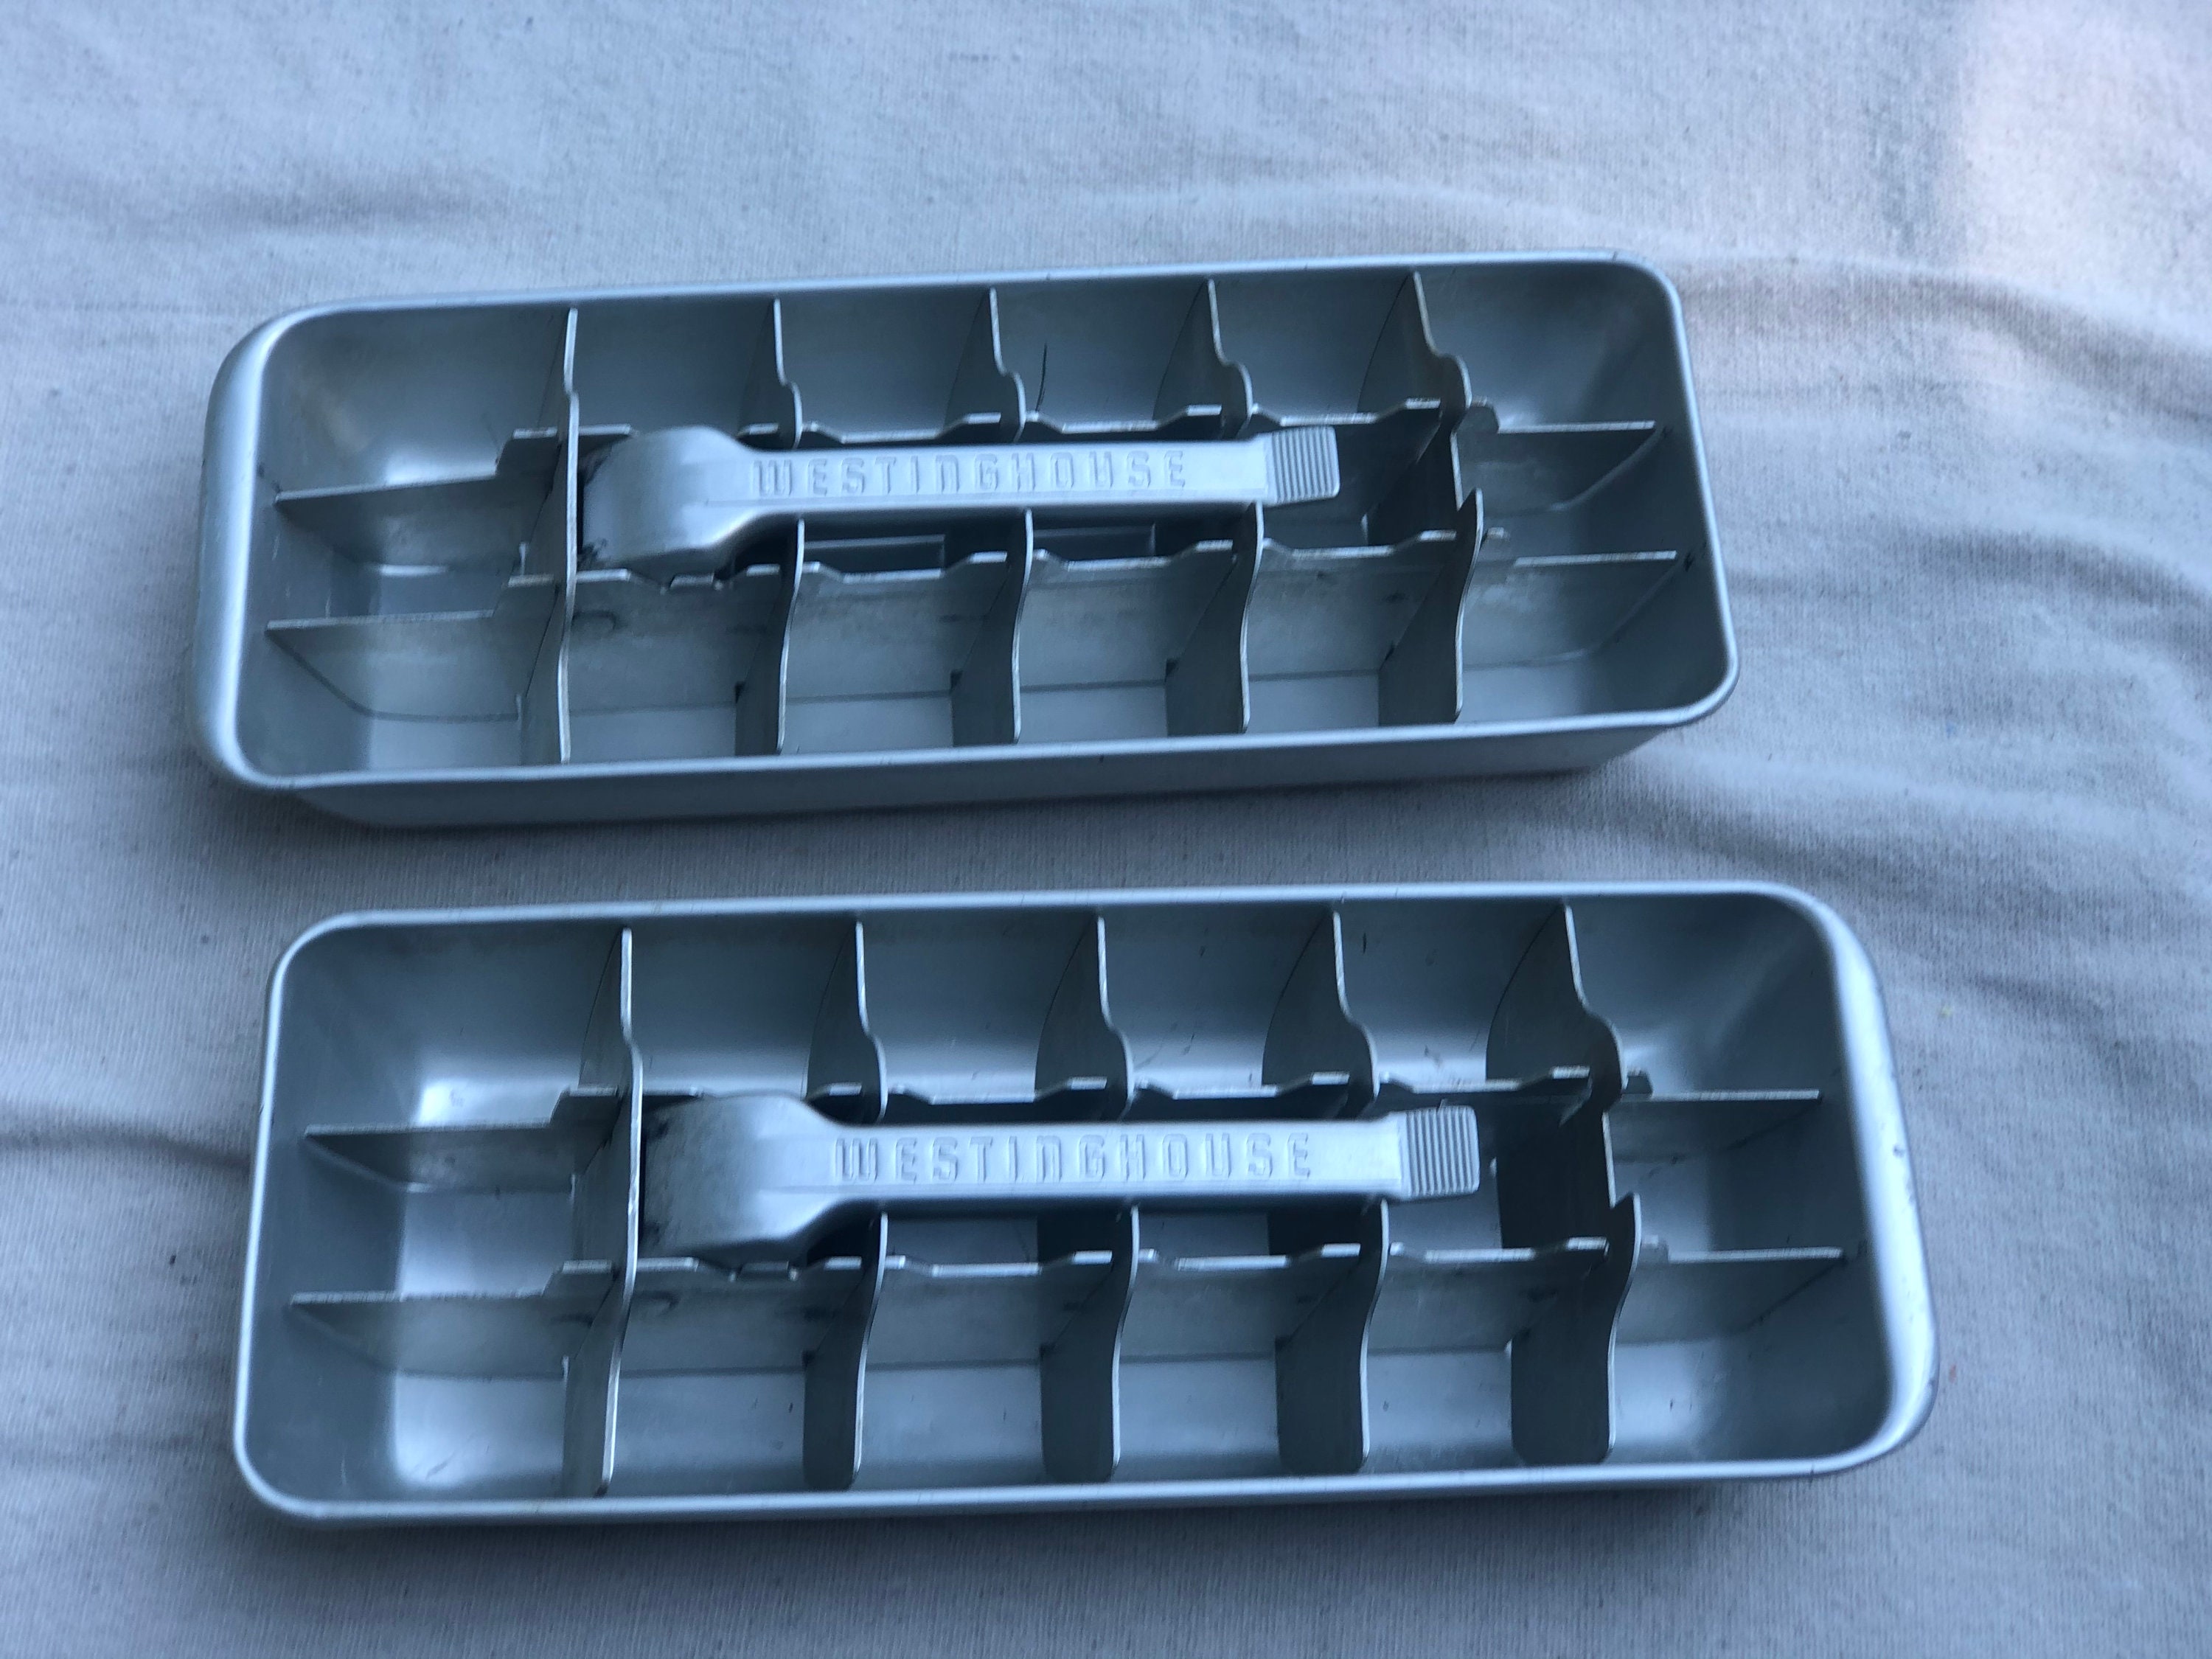 2.1 inch Inverted Ice Cube Mold